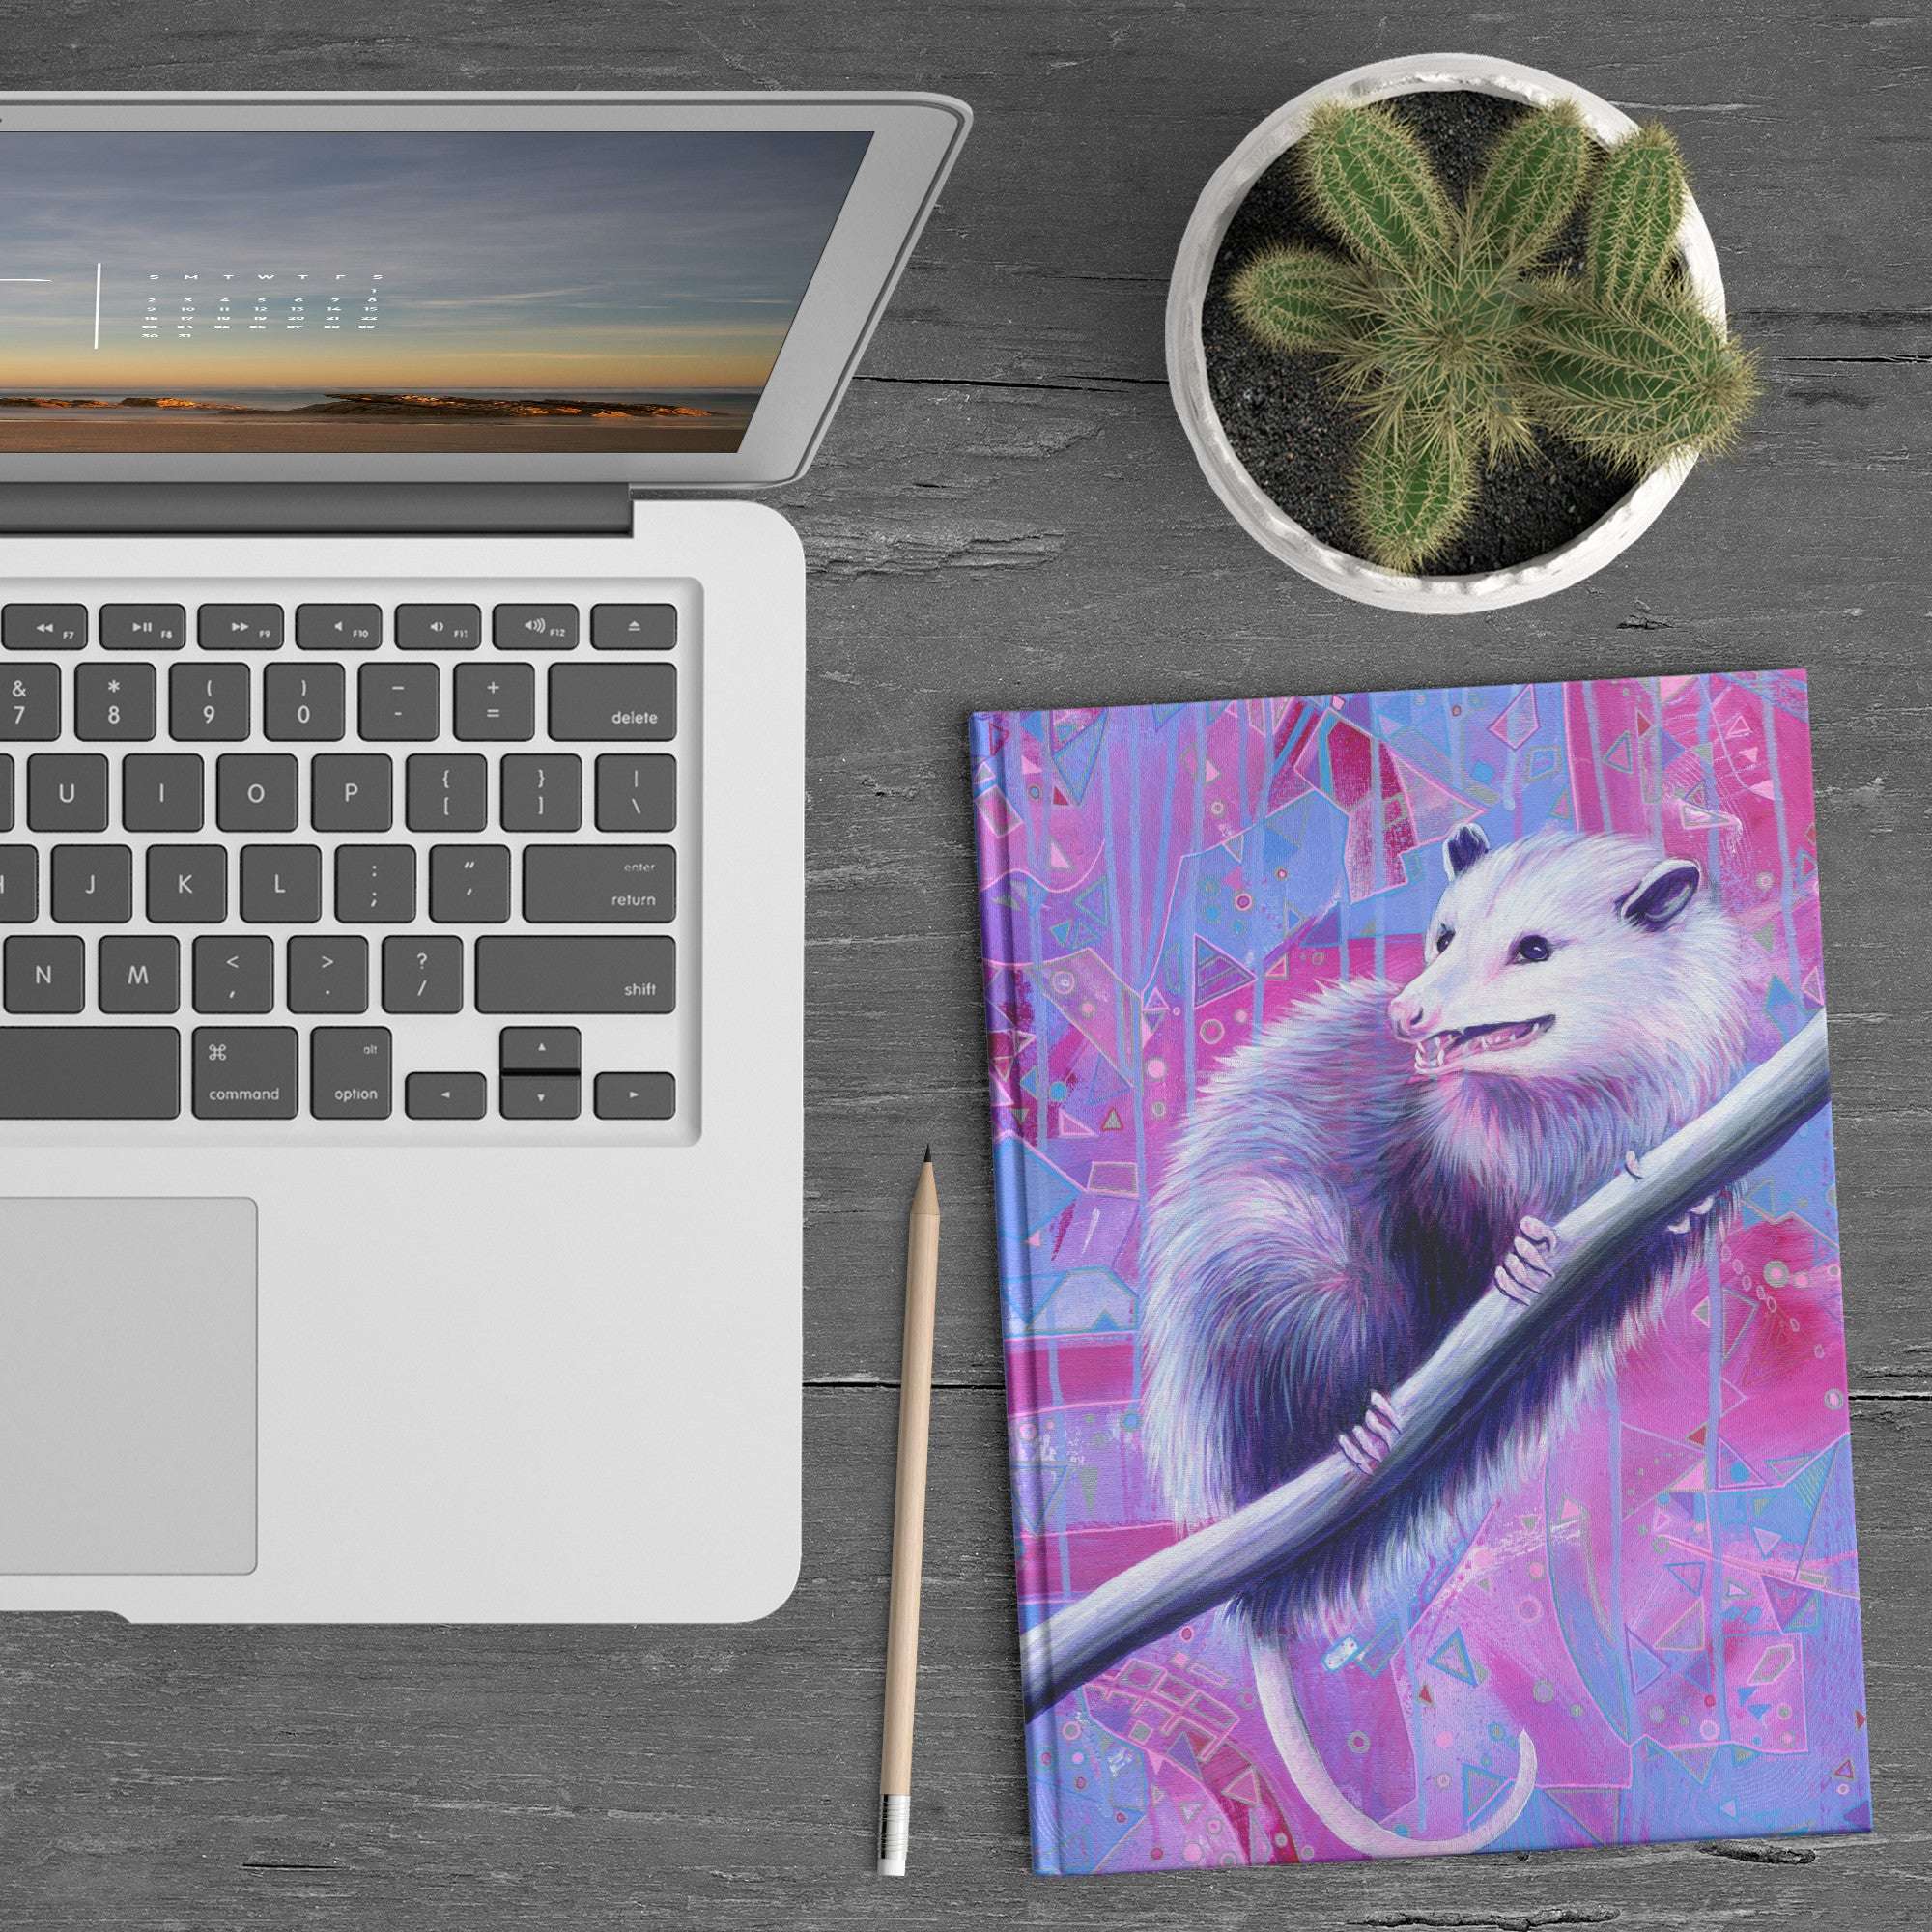 A laptop next to an Opossum Journal with a vibrant illustration of a possum on a colorful geometric background, a pencil, and a small potted cactus on a wooden desk.